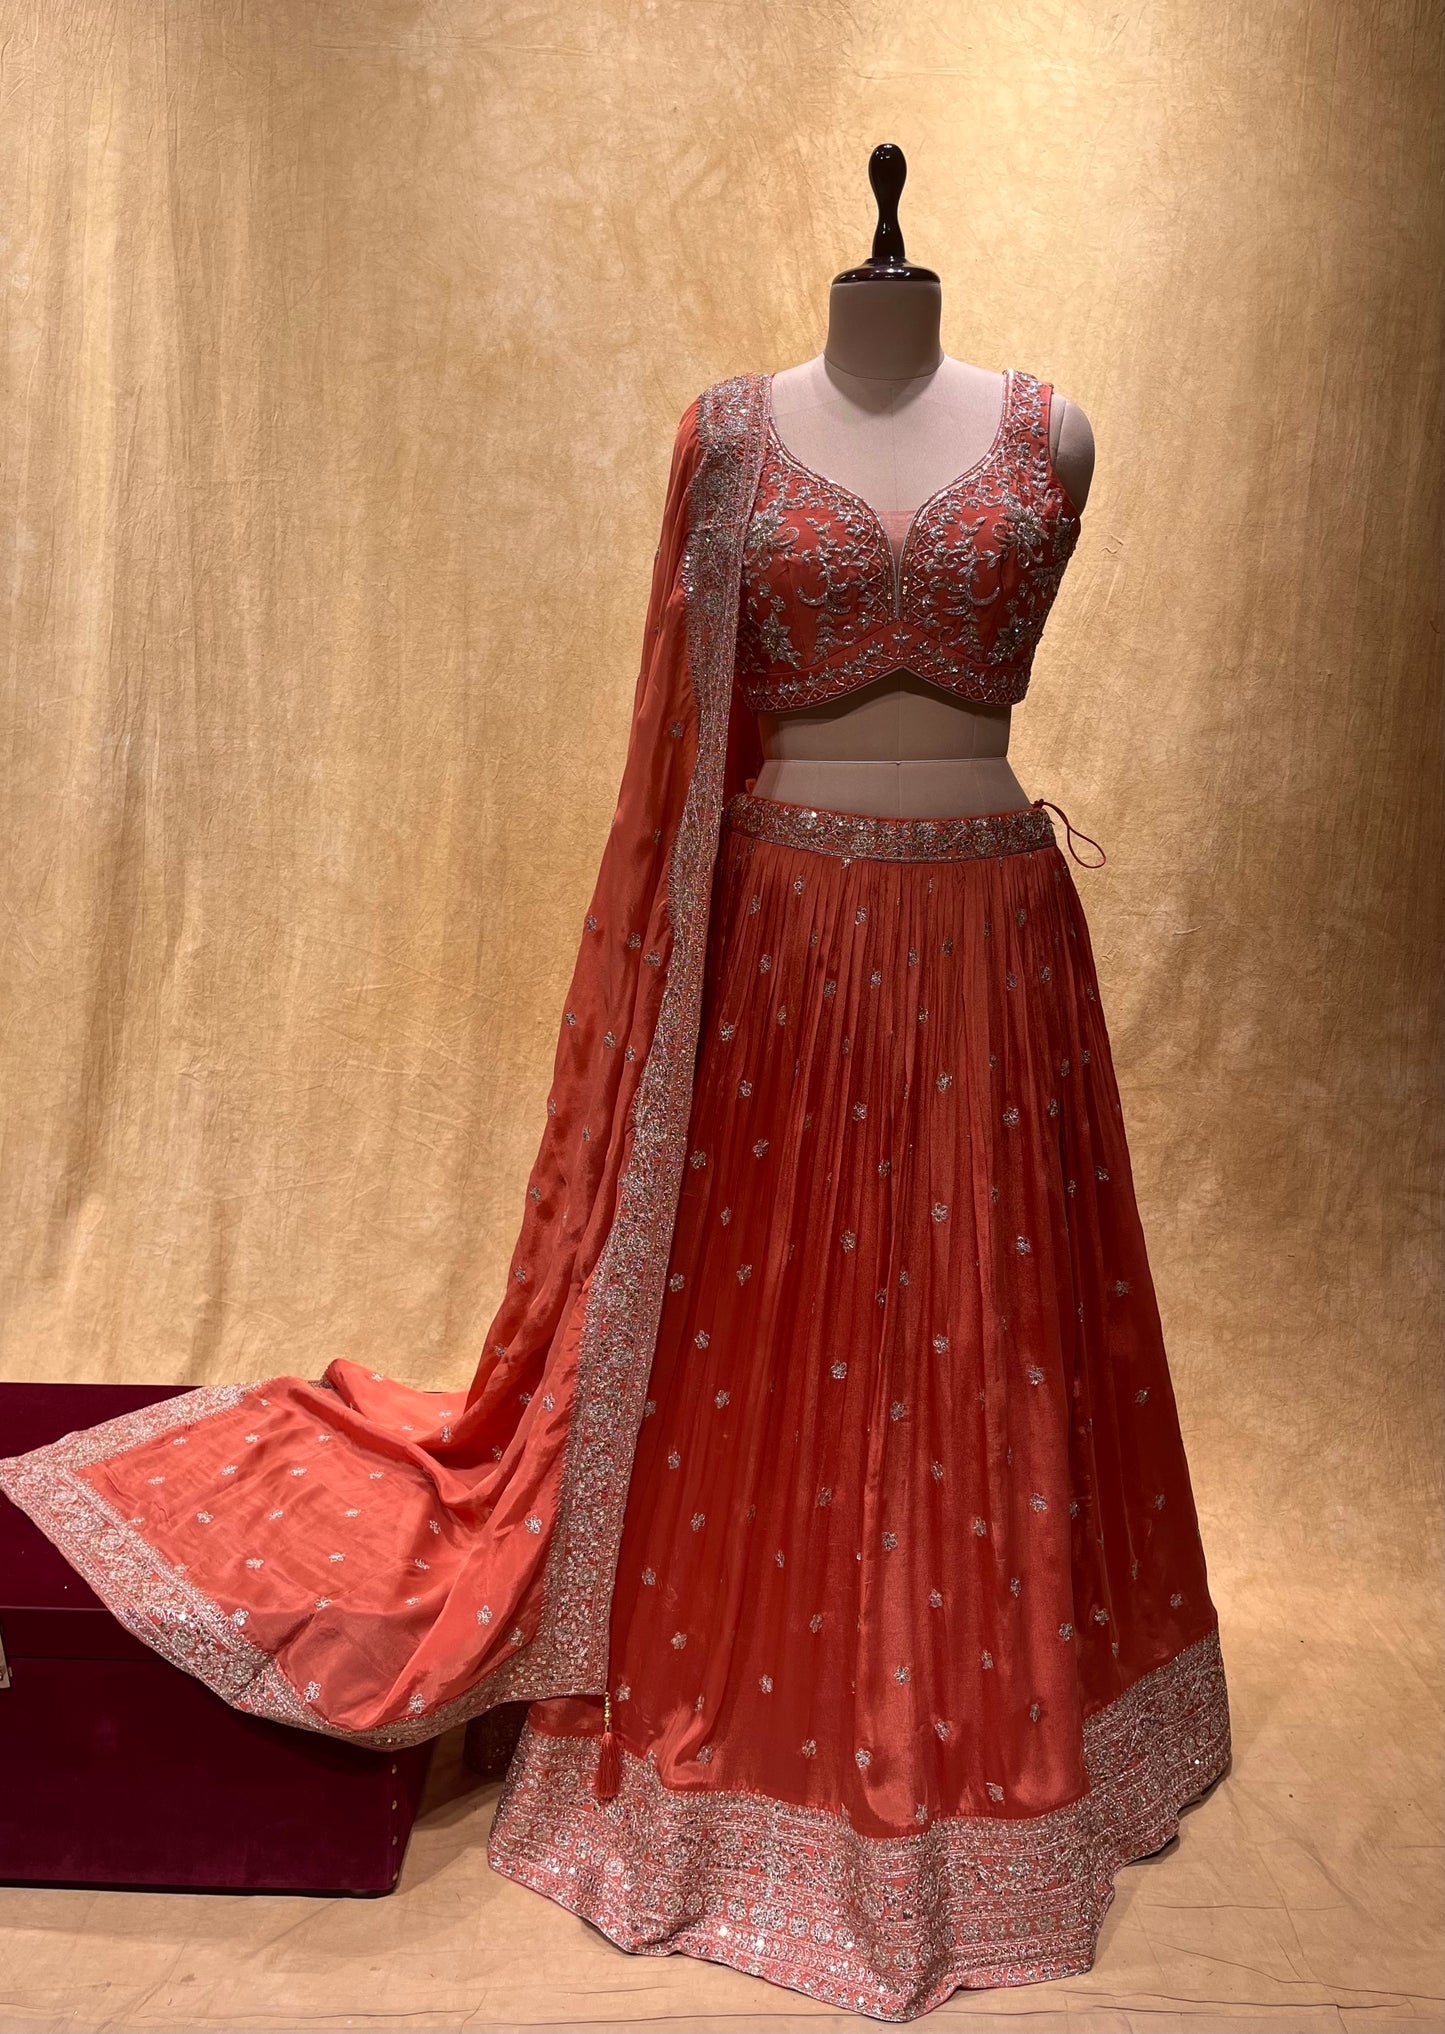 (DELIVERY IN 20-25 DAYS) BRIDESMAIDS READYMADE RUST ORANGE COLOUR CHINON LEHENGA WITH CROP TOP BLOUSE EMBELLISHED WITH ZARI & CUTDANA WORK